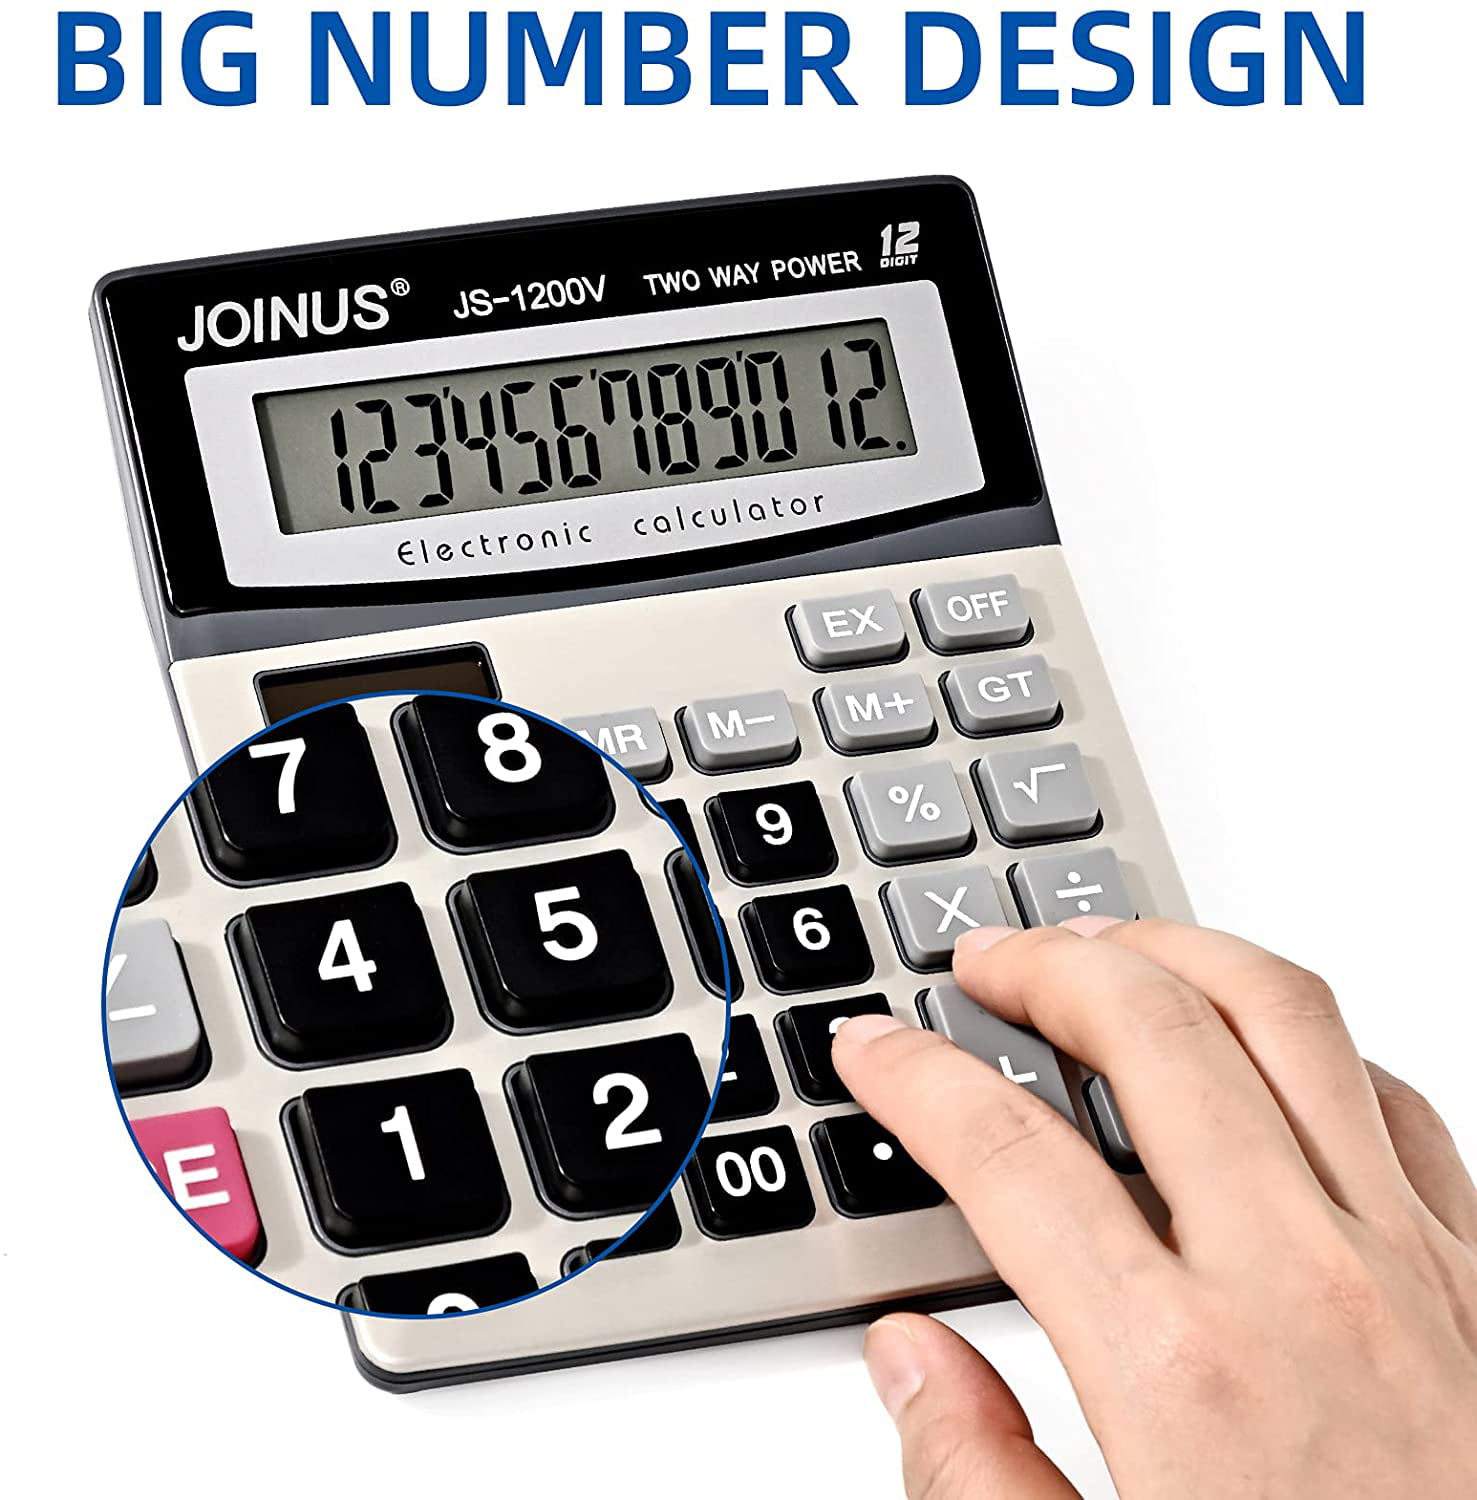 Details about   Basic Financial Calculator 12 Digits Large LCD Display Solar/Battery Powered New 